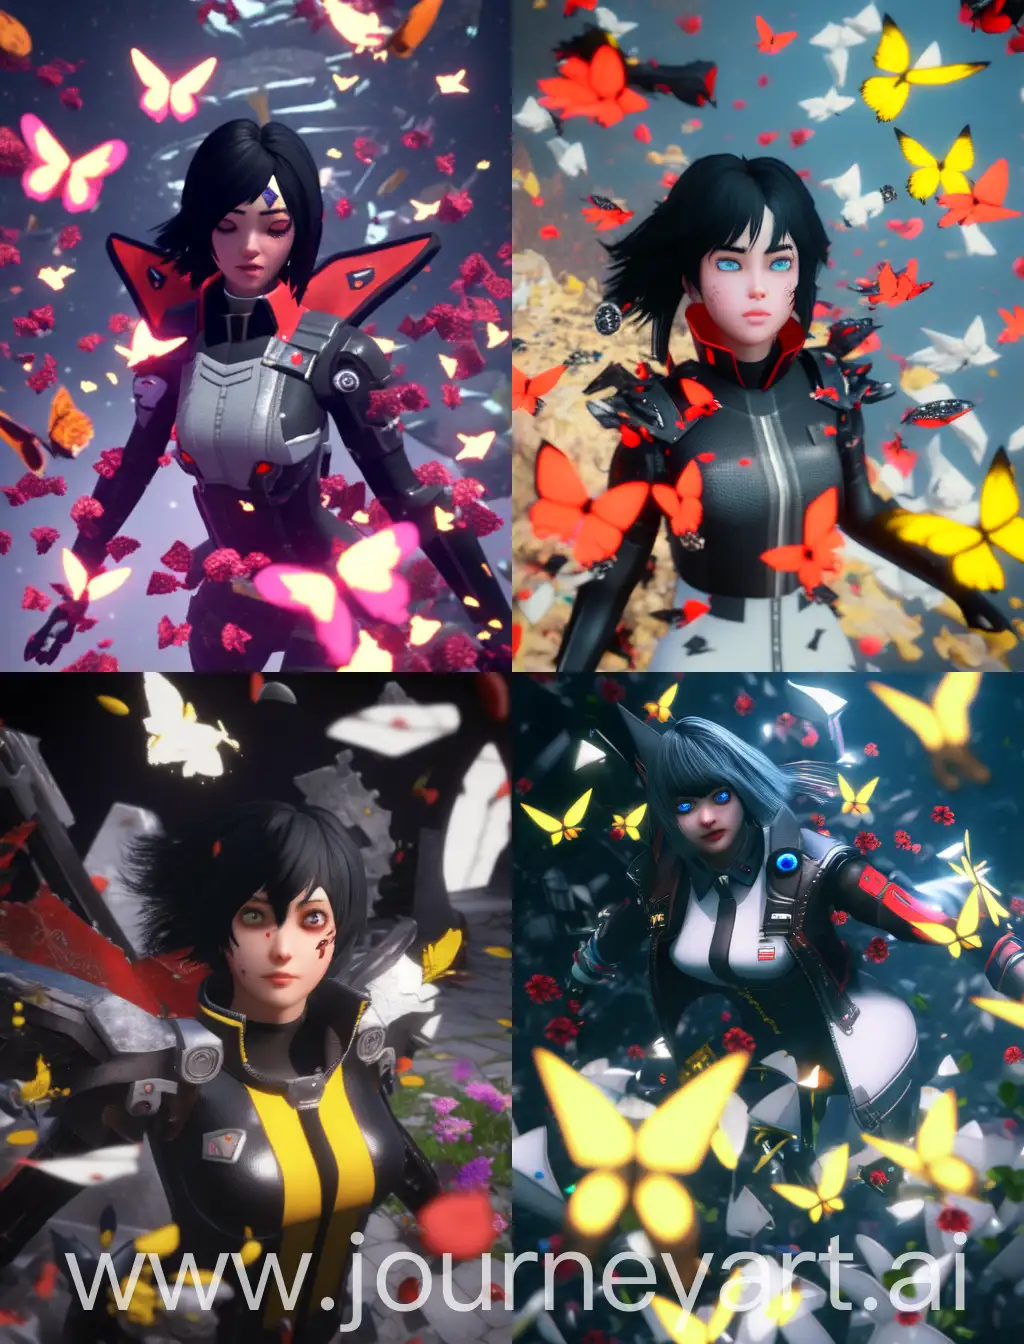 Cyberpunk-DollLike-Girl-with-White-and-Black-Hair-Surrounded-by-Yellow-Butterflies